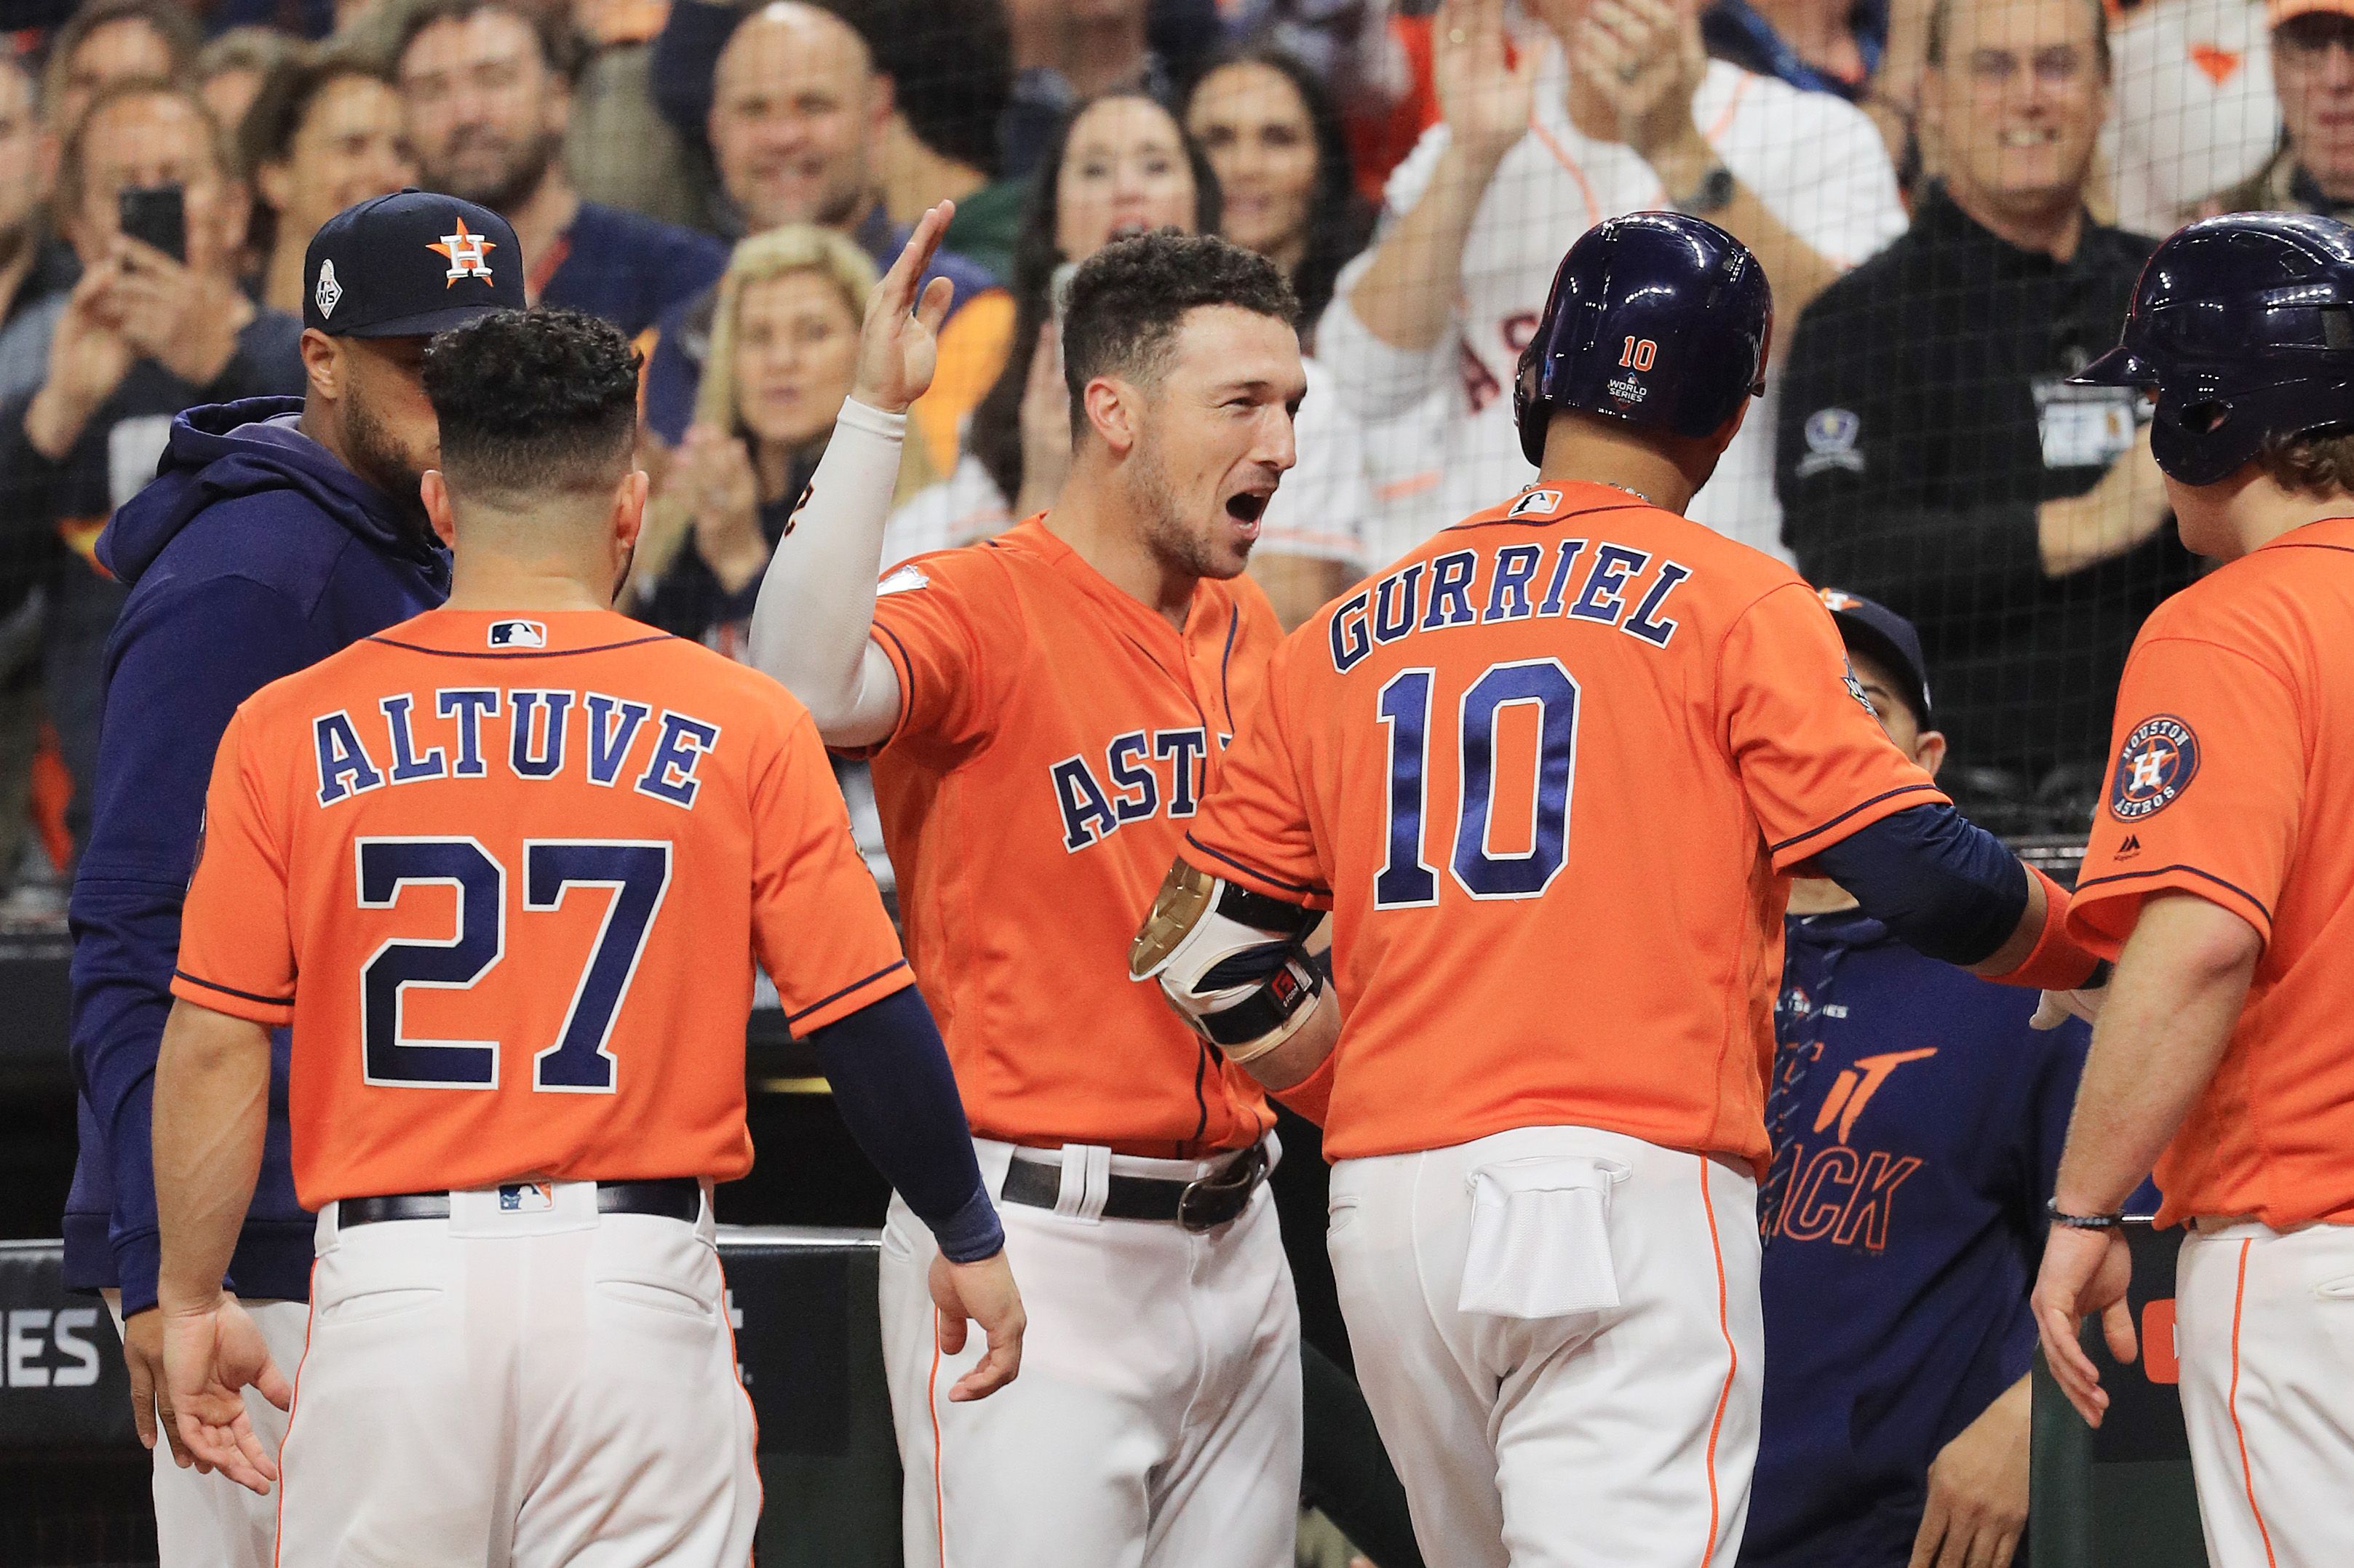 Yuli Gurriel #10 of the Houston Astros is congratulated by his teammate Alex Bregman #2 after hitting a solo home run against the Washington Nationals 